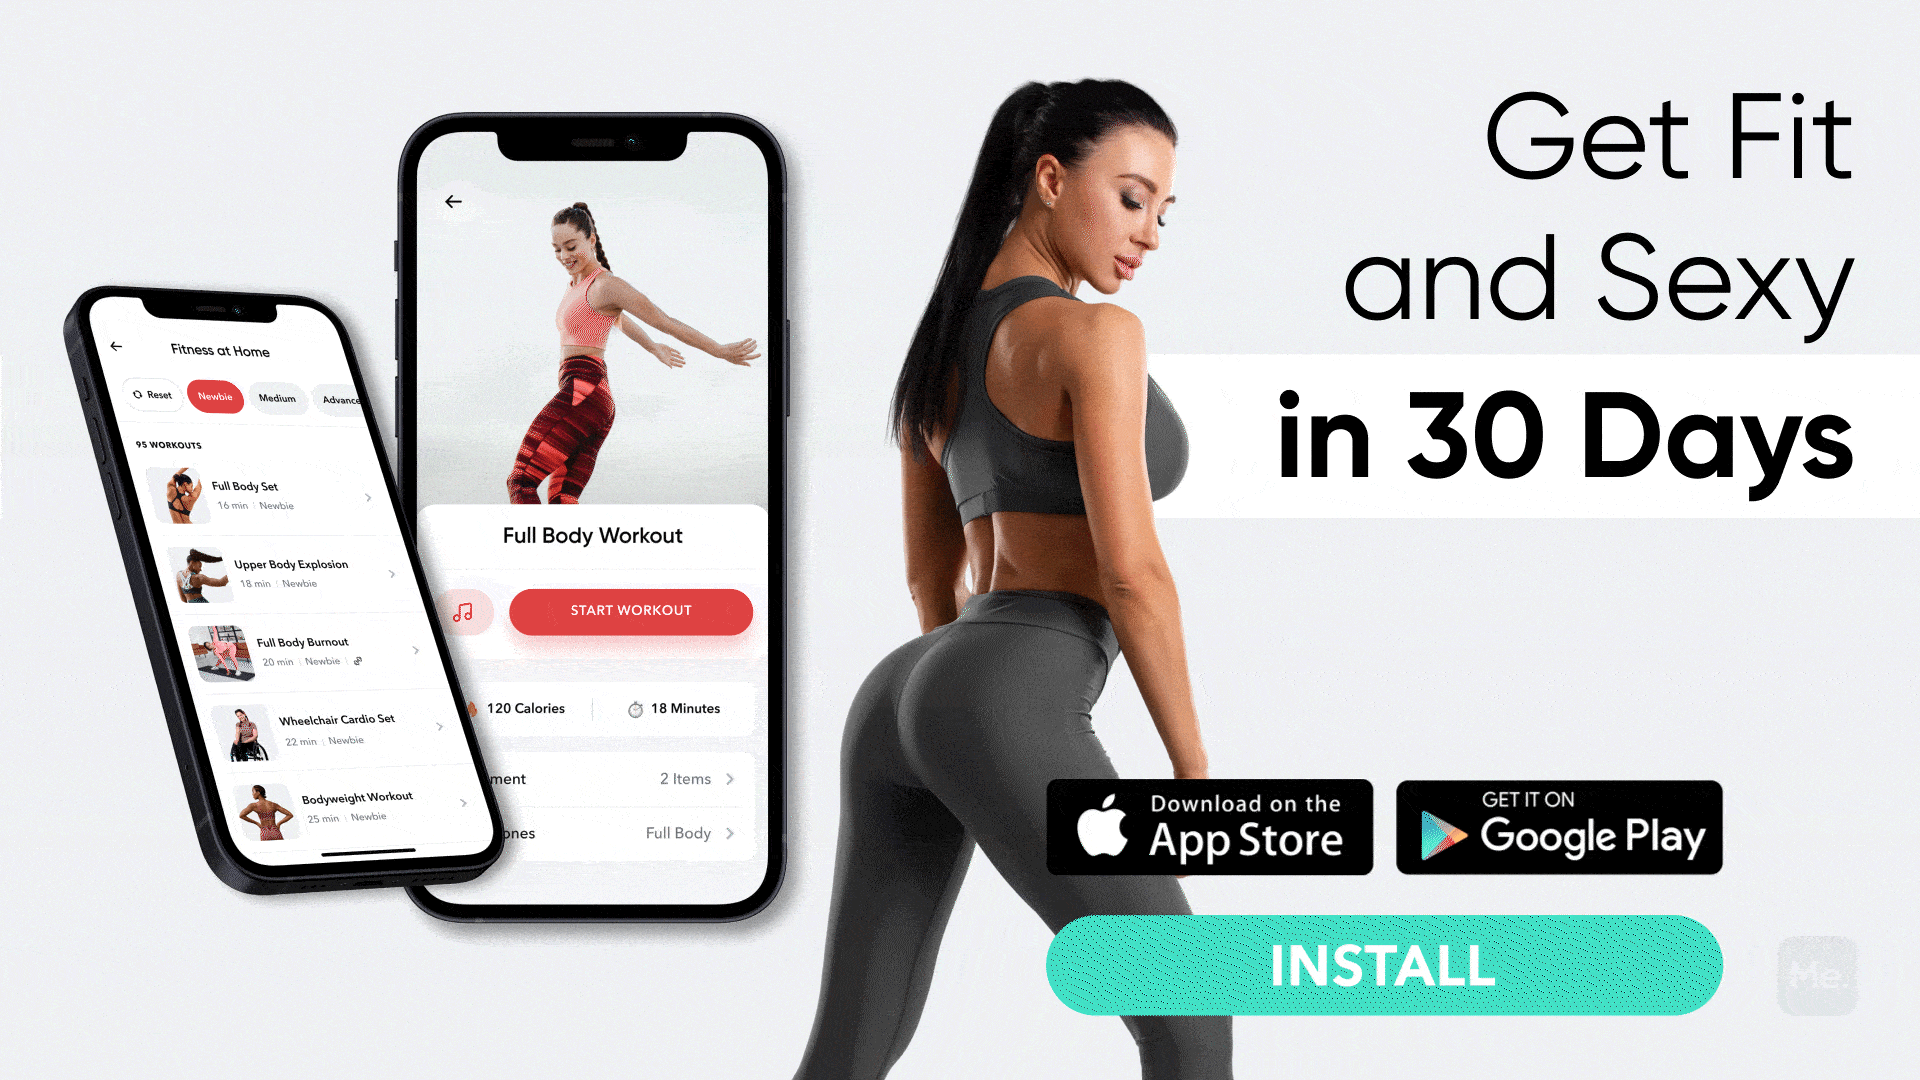 Get Fit and Sexy in 30 Days